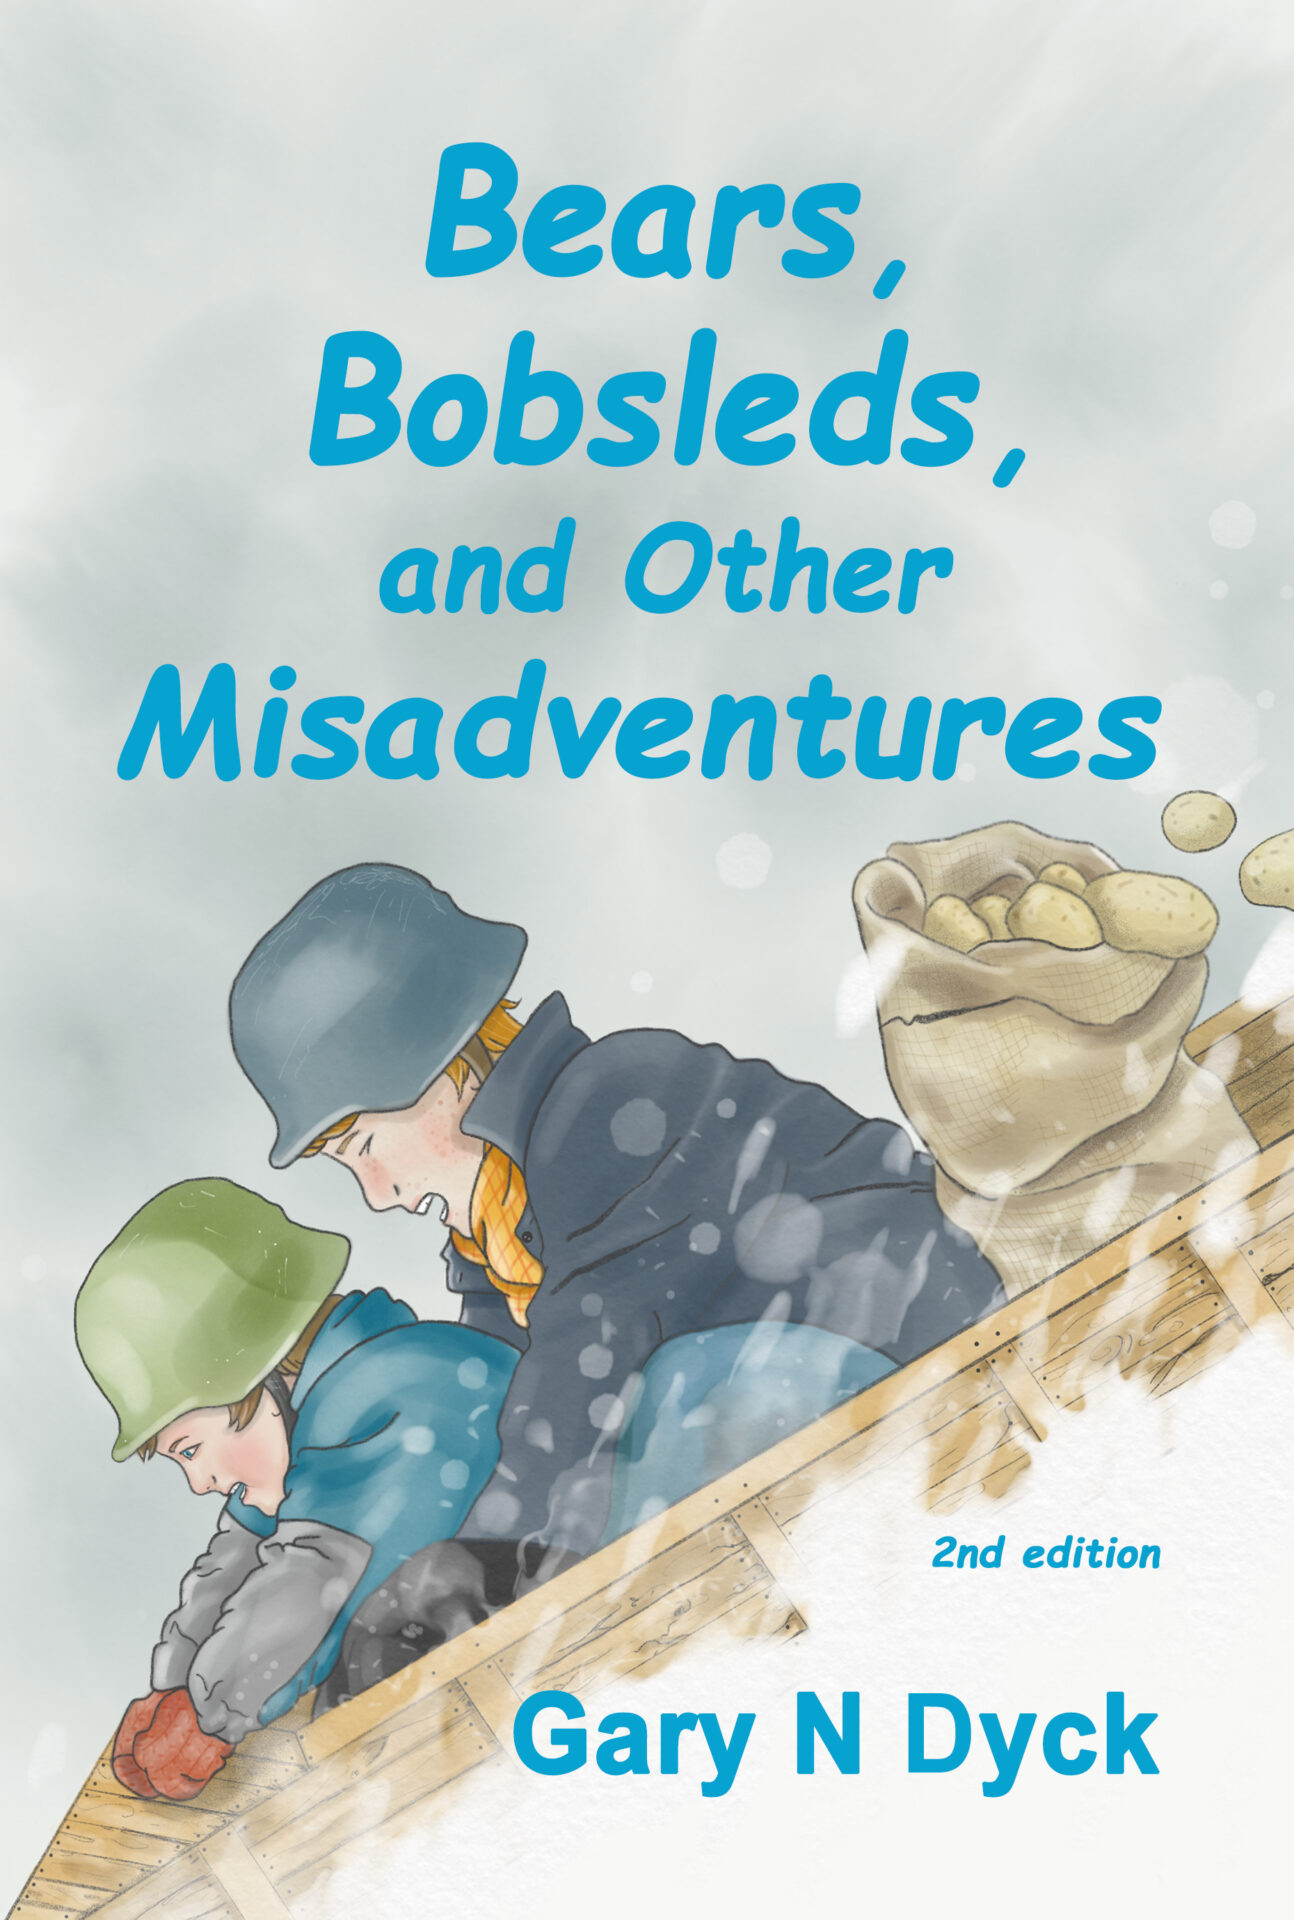 Bears, Bobsleds, and Other Misadventures by author Gary N Dyck